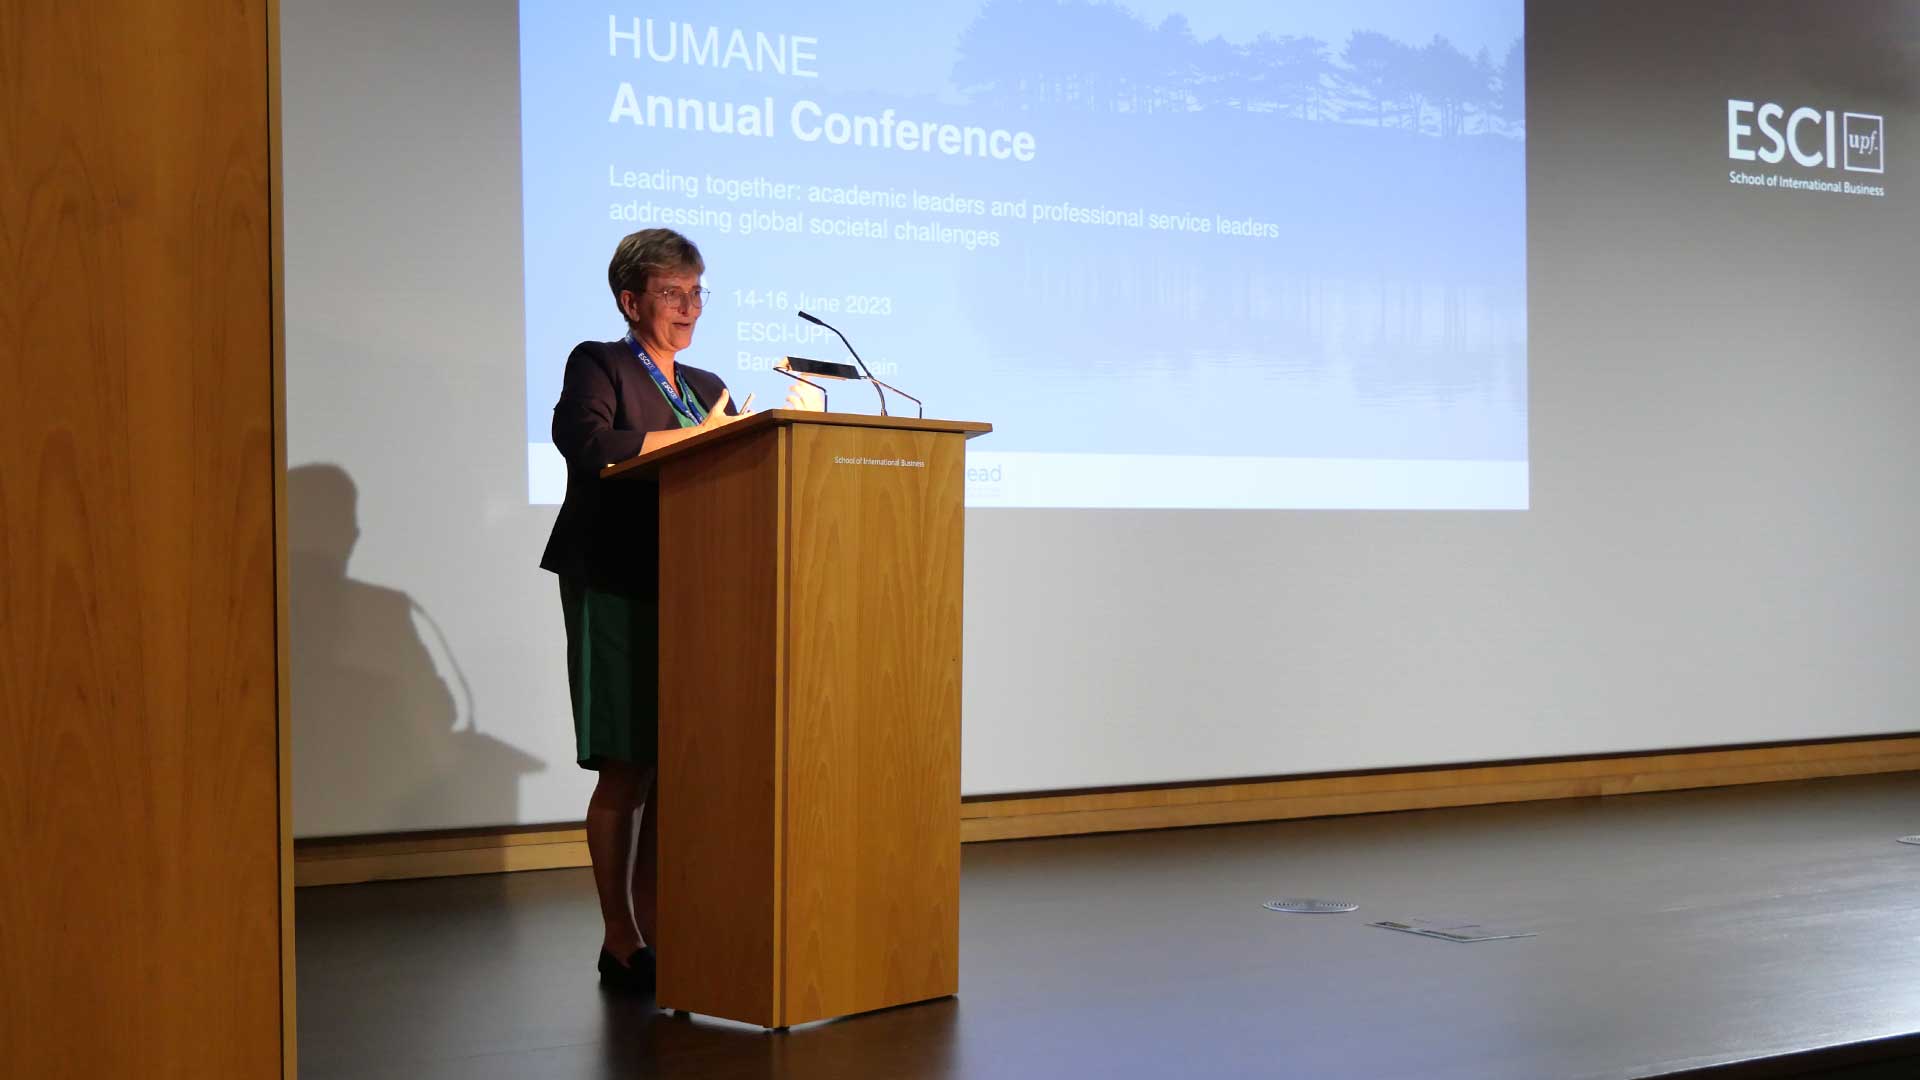 Humane Annual Conference